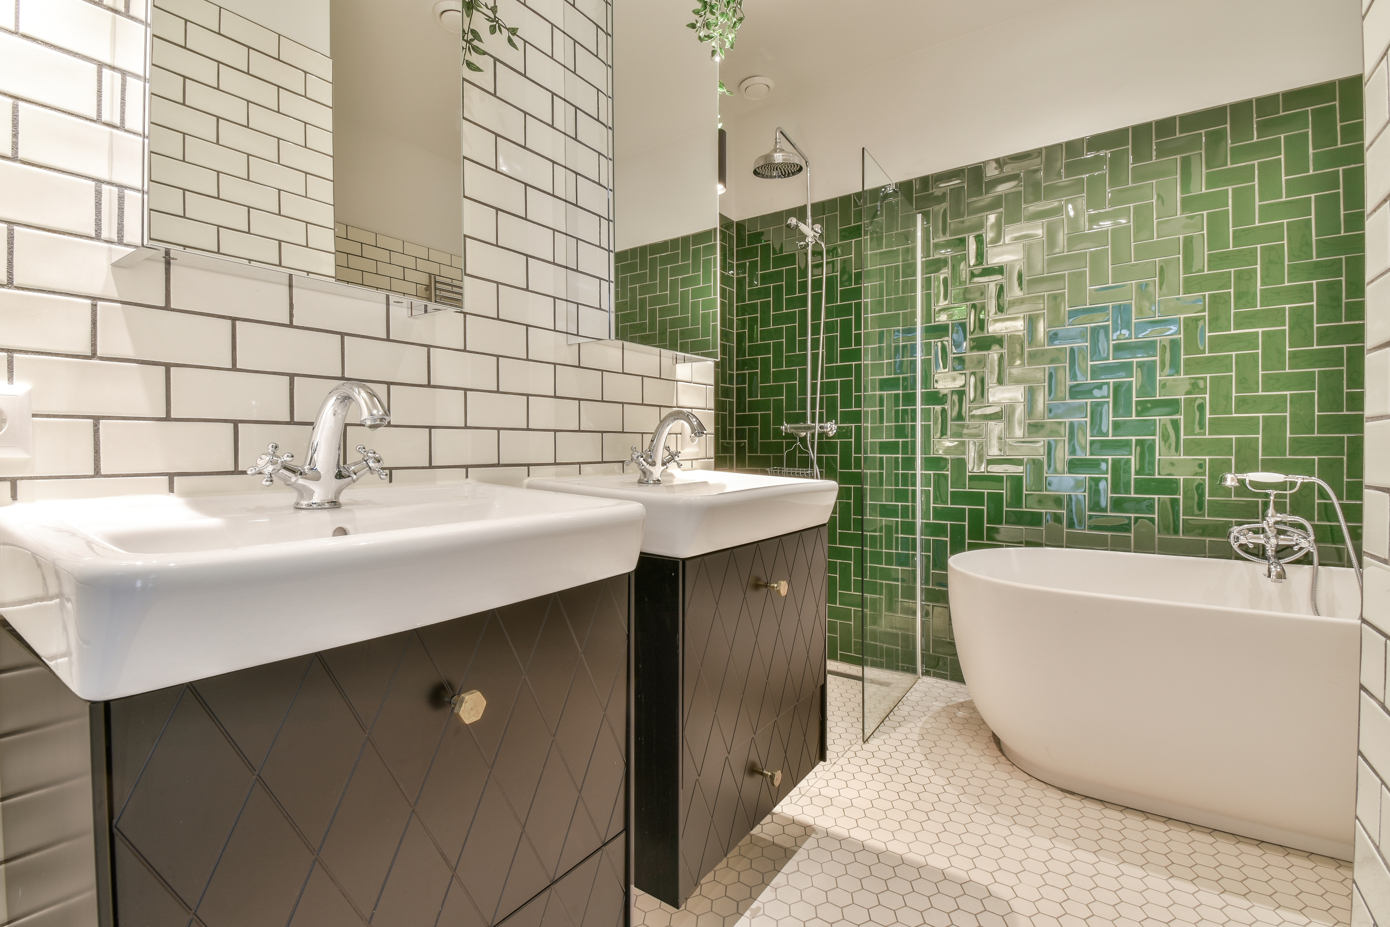 Beyond Functionality: Elevating Your Bathroom with Decorative Touches